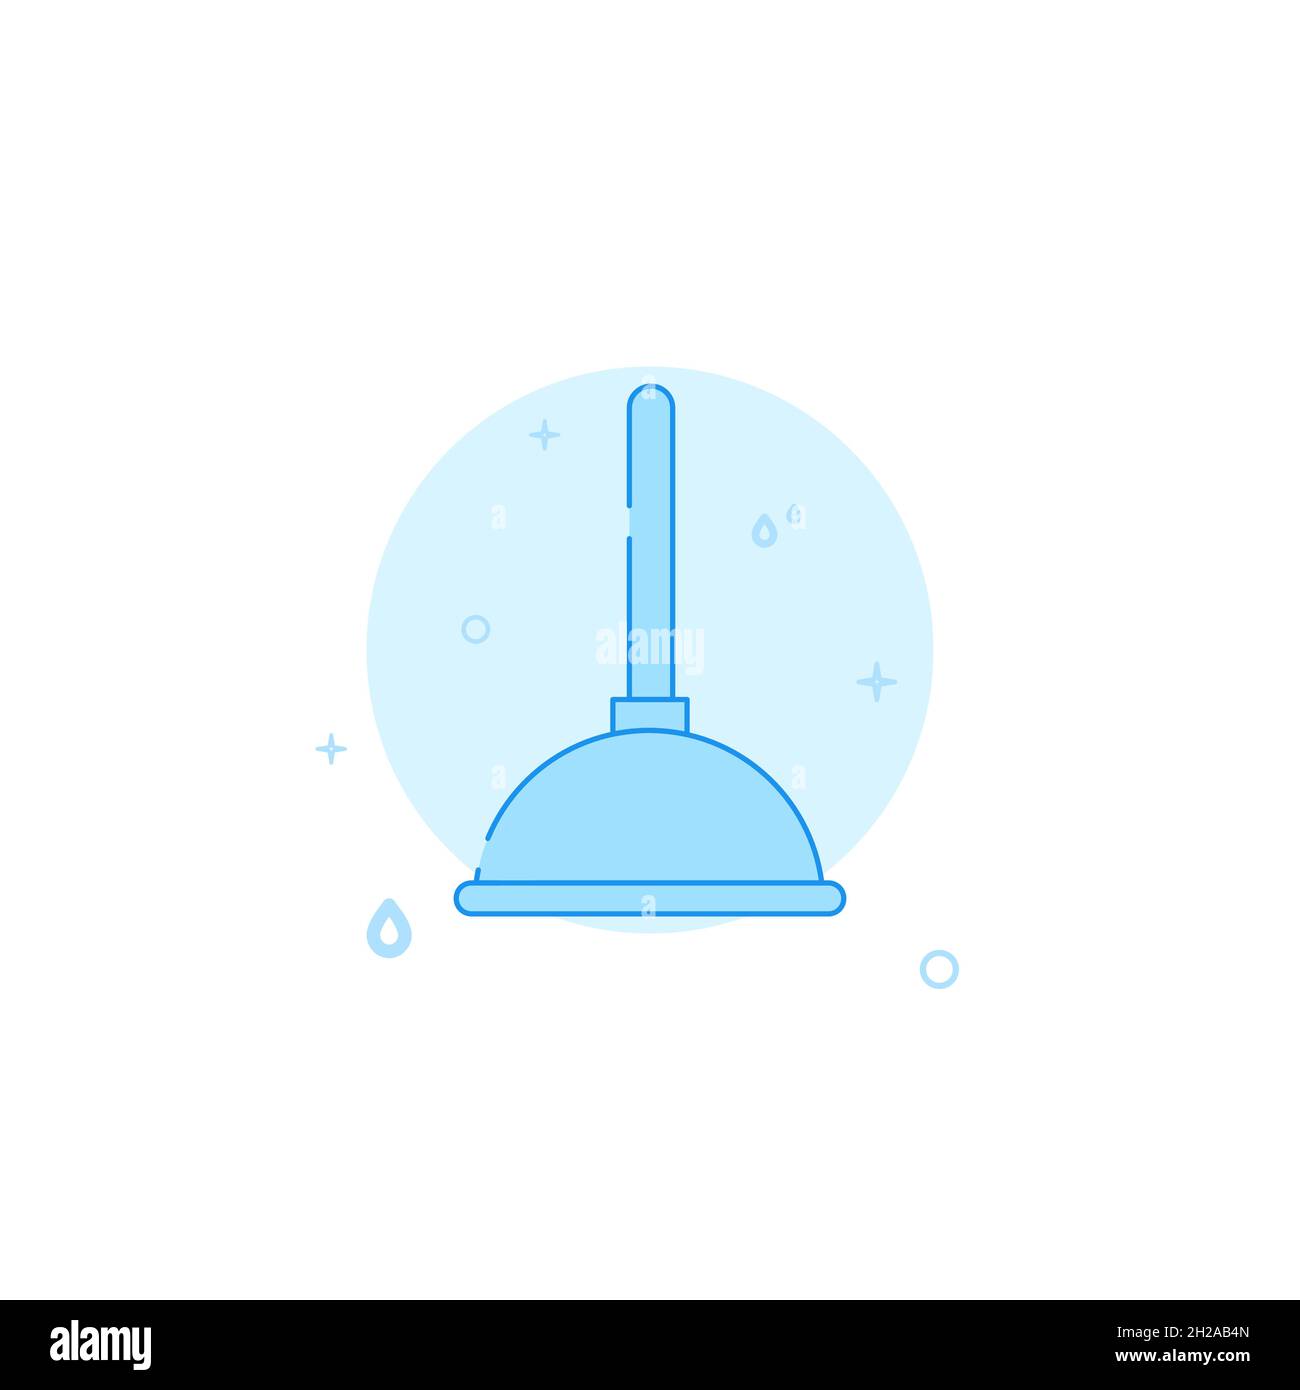 Drain pipe cleaner vector icon. Plumbing flat illustration. Filled line style. Blue monochrome design. Editable stroke. Adjust line weight. Stock Vector